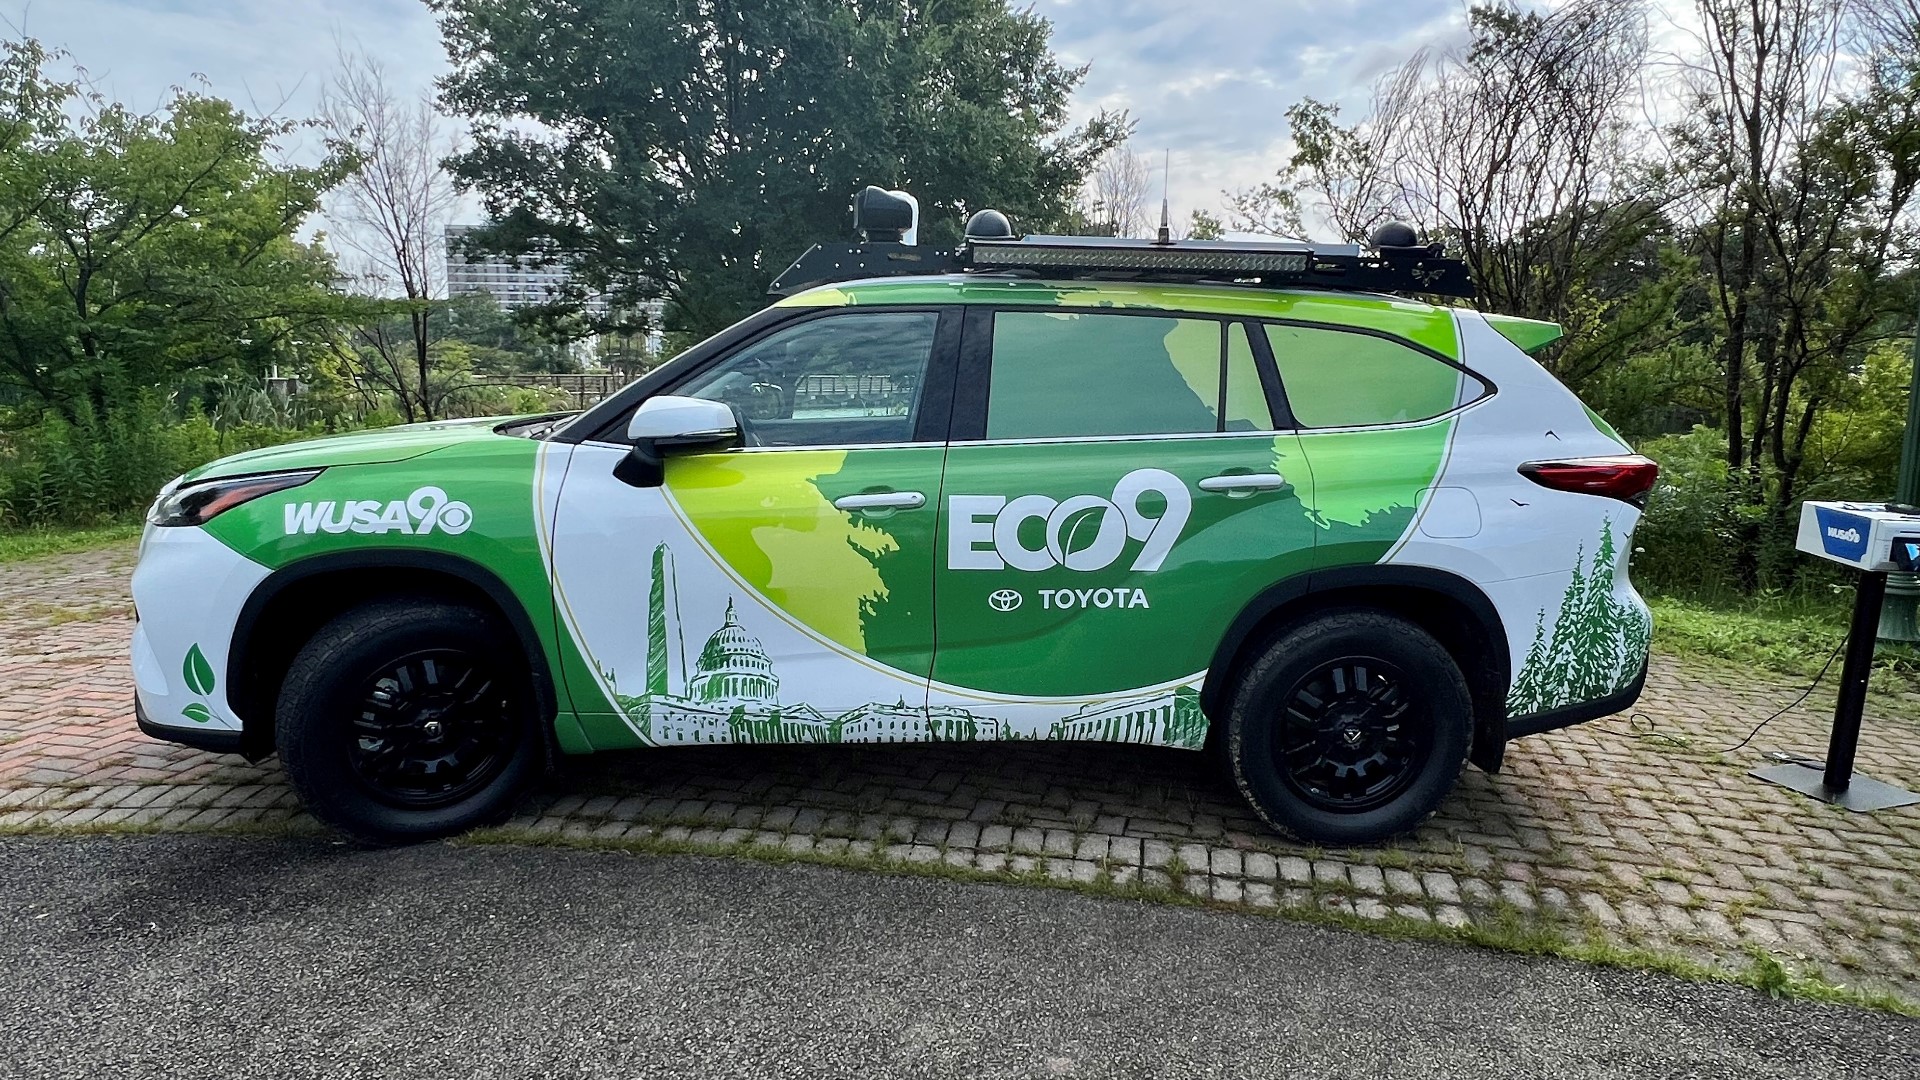 ECO9's foundation is a 2022 Toyota Highlander XLE Hybrid that WUSA9 and engineers significantly modified at Frontline Communications, a builder of newsgathering car.